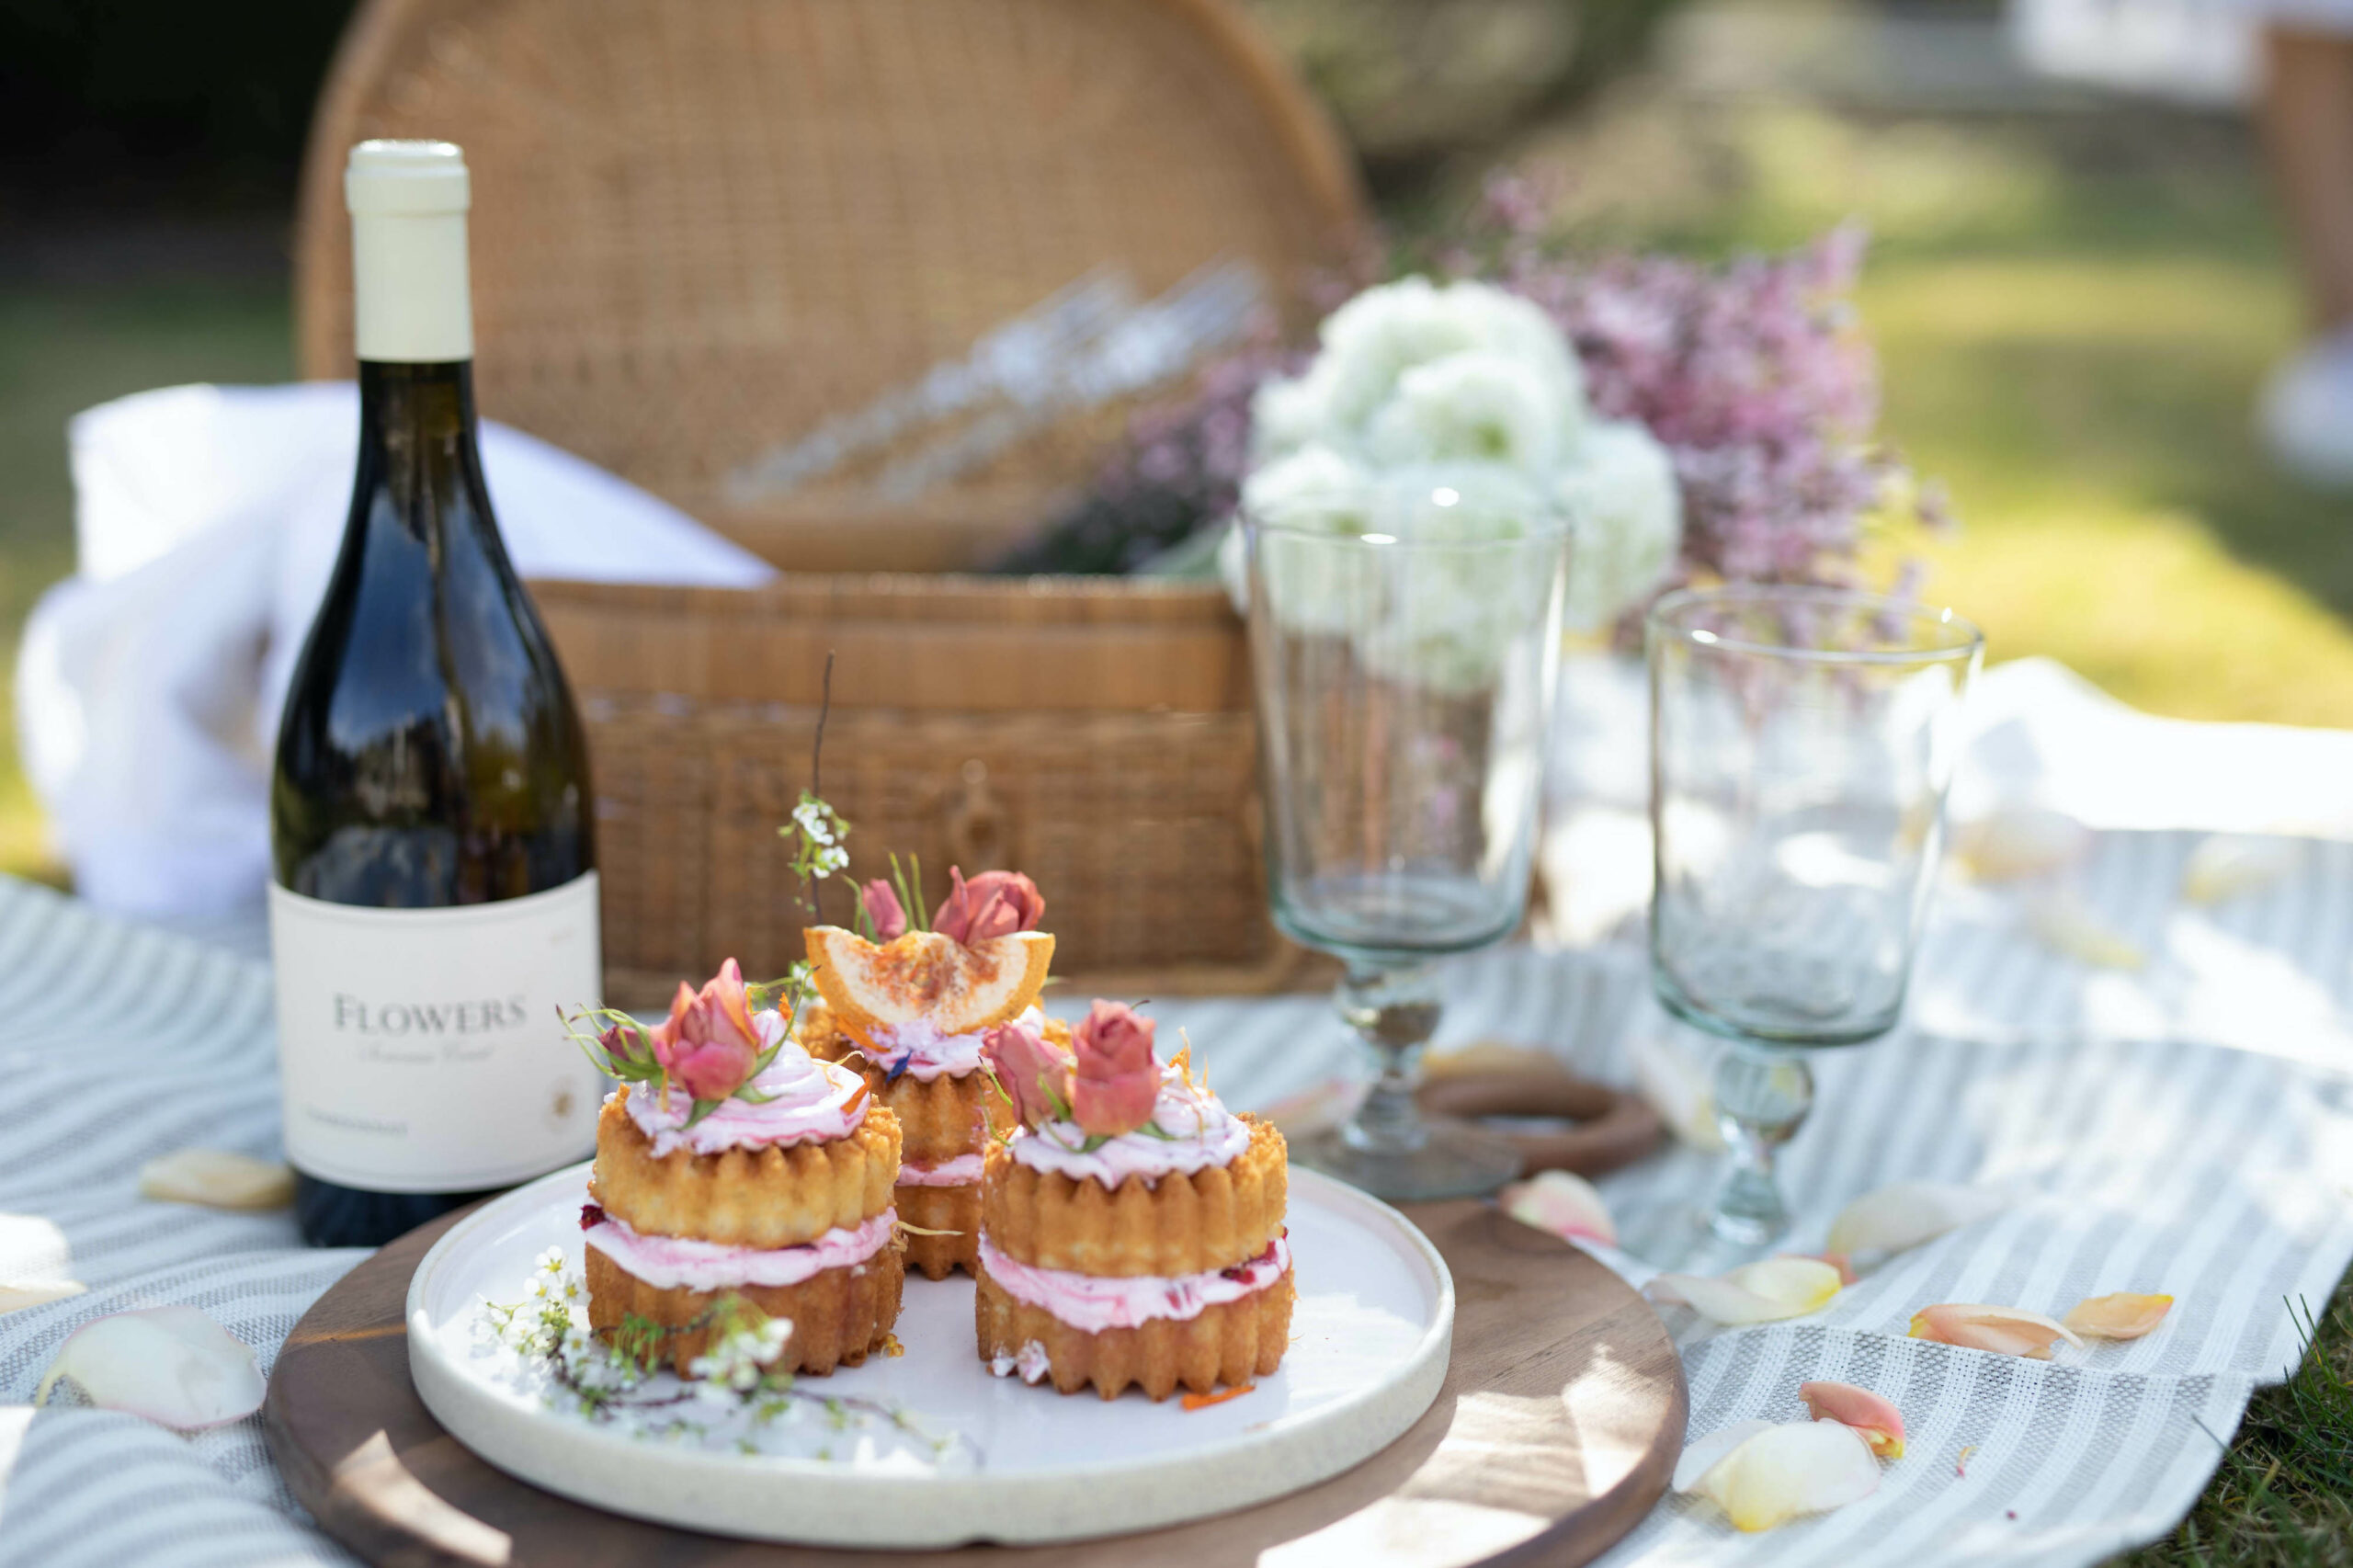 Spring Picnic with wine and cakes